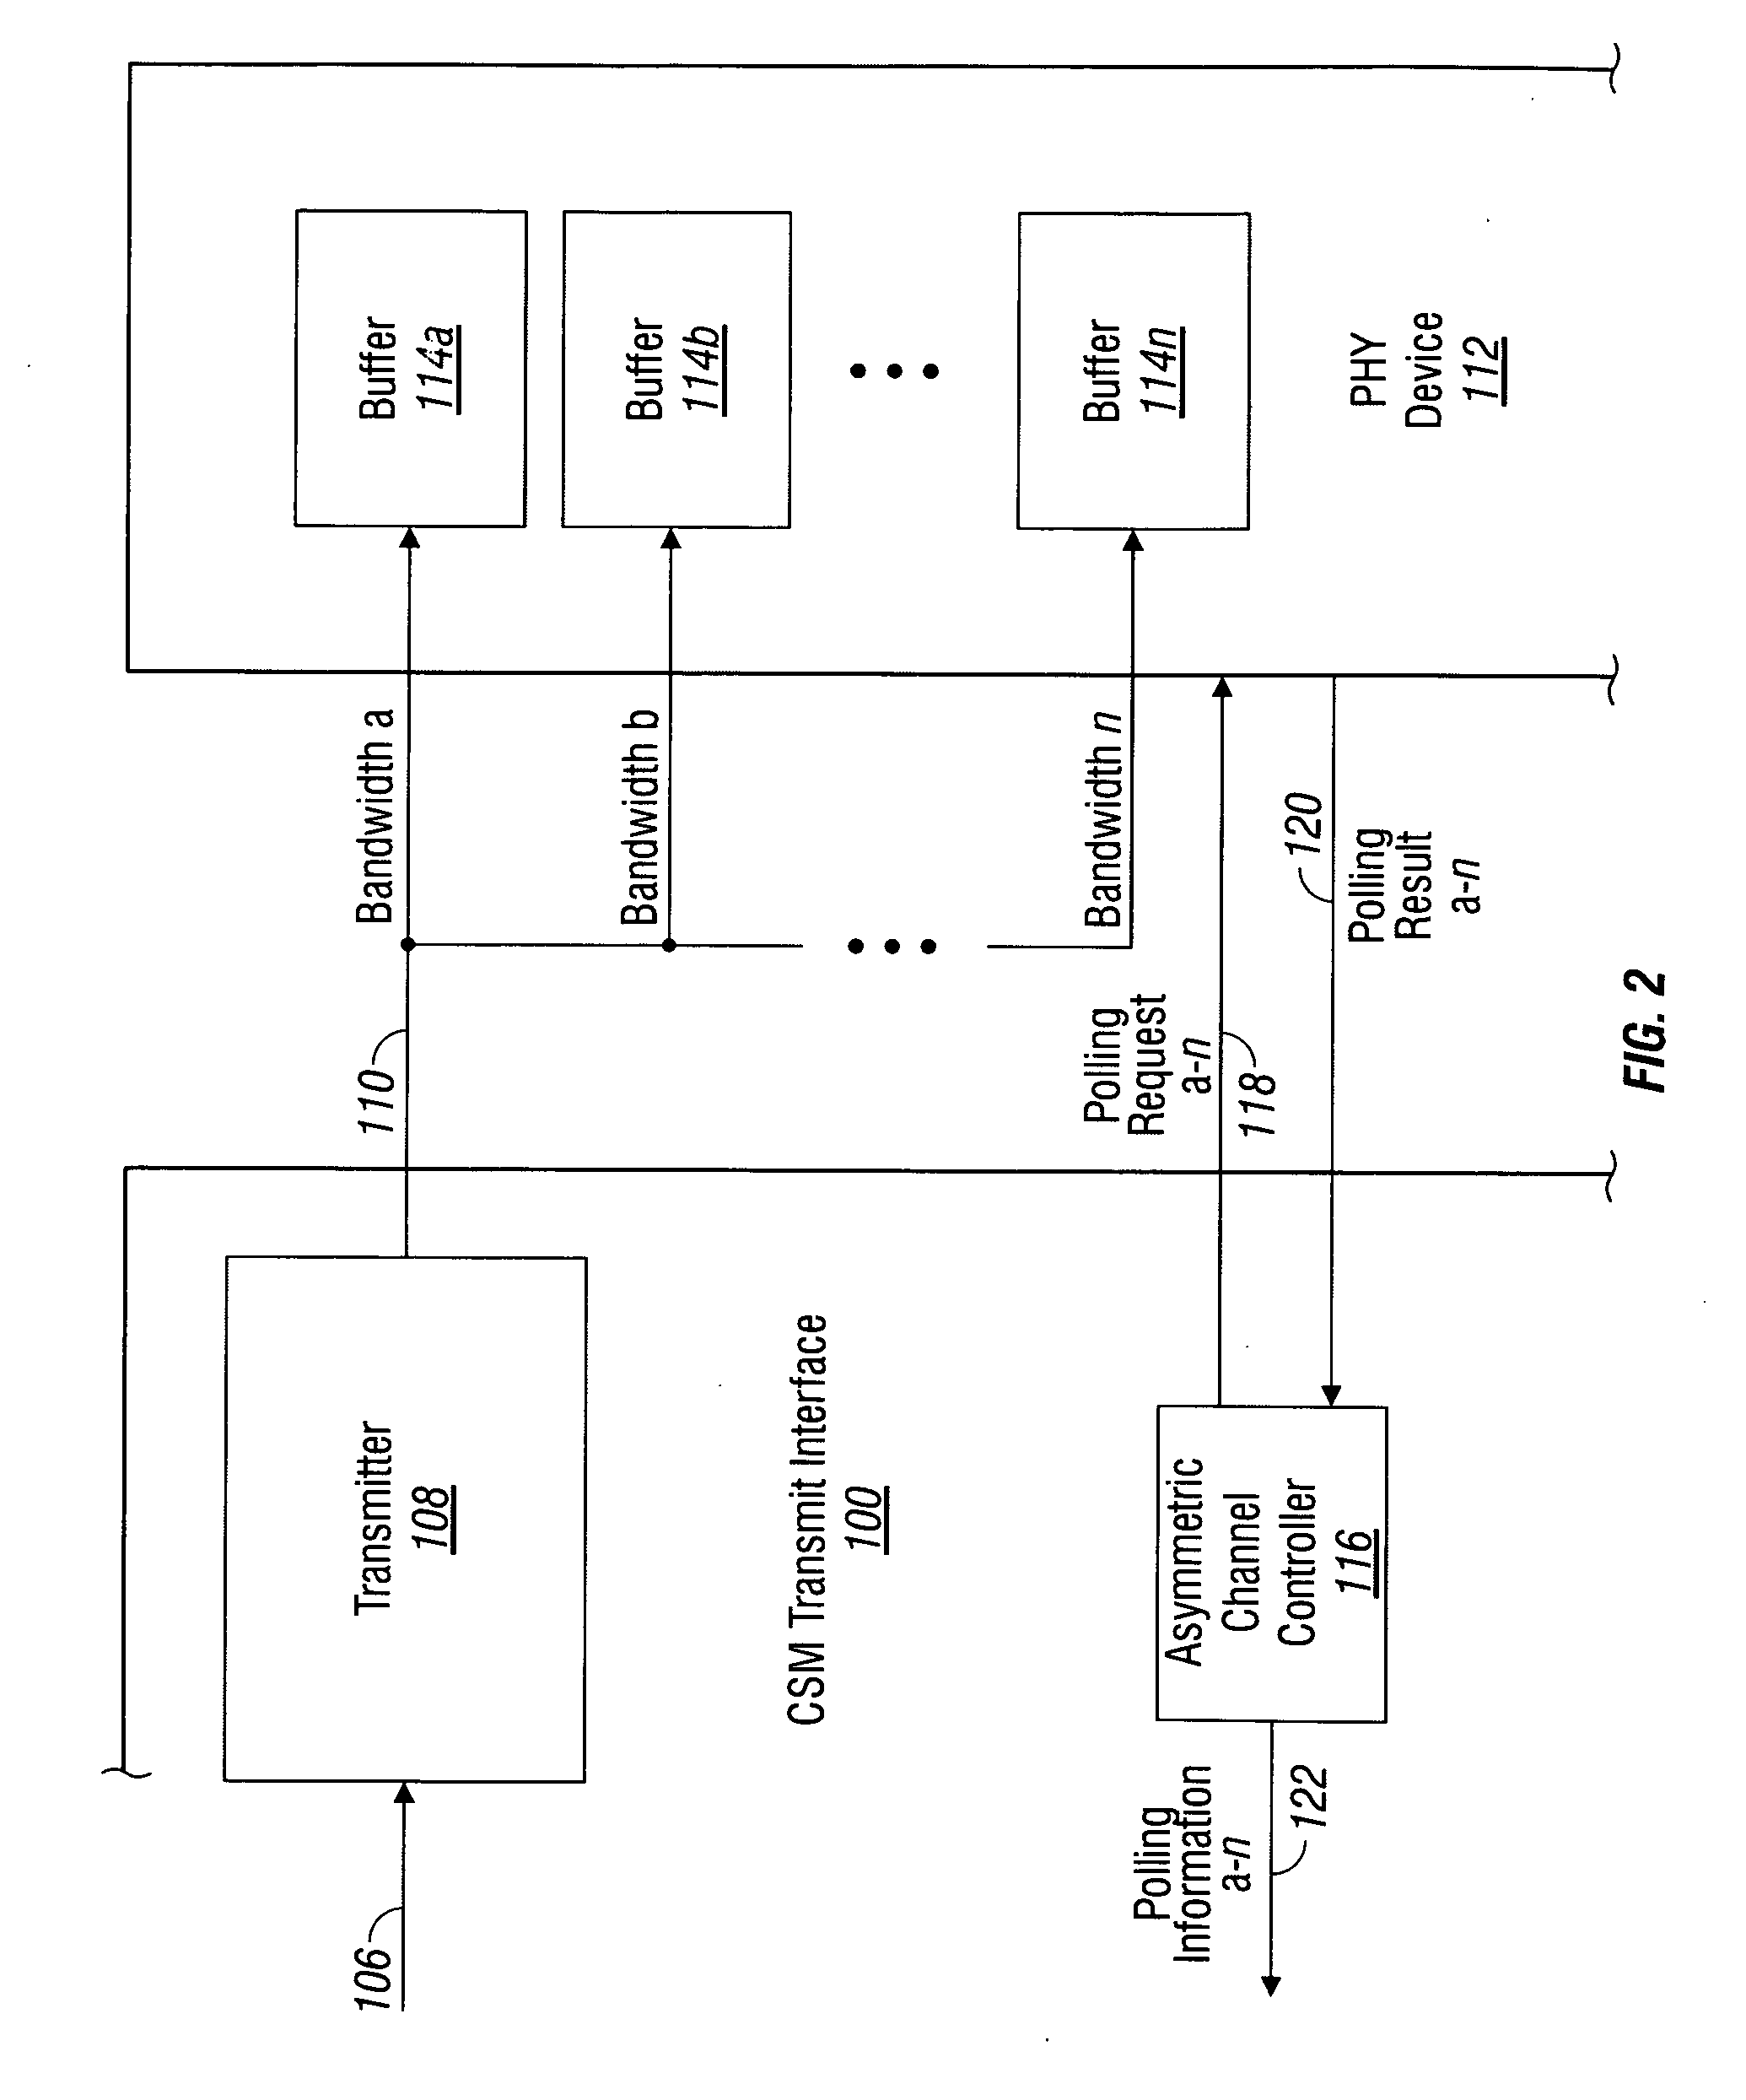 Credit based flow control in an asymmetric channel environment